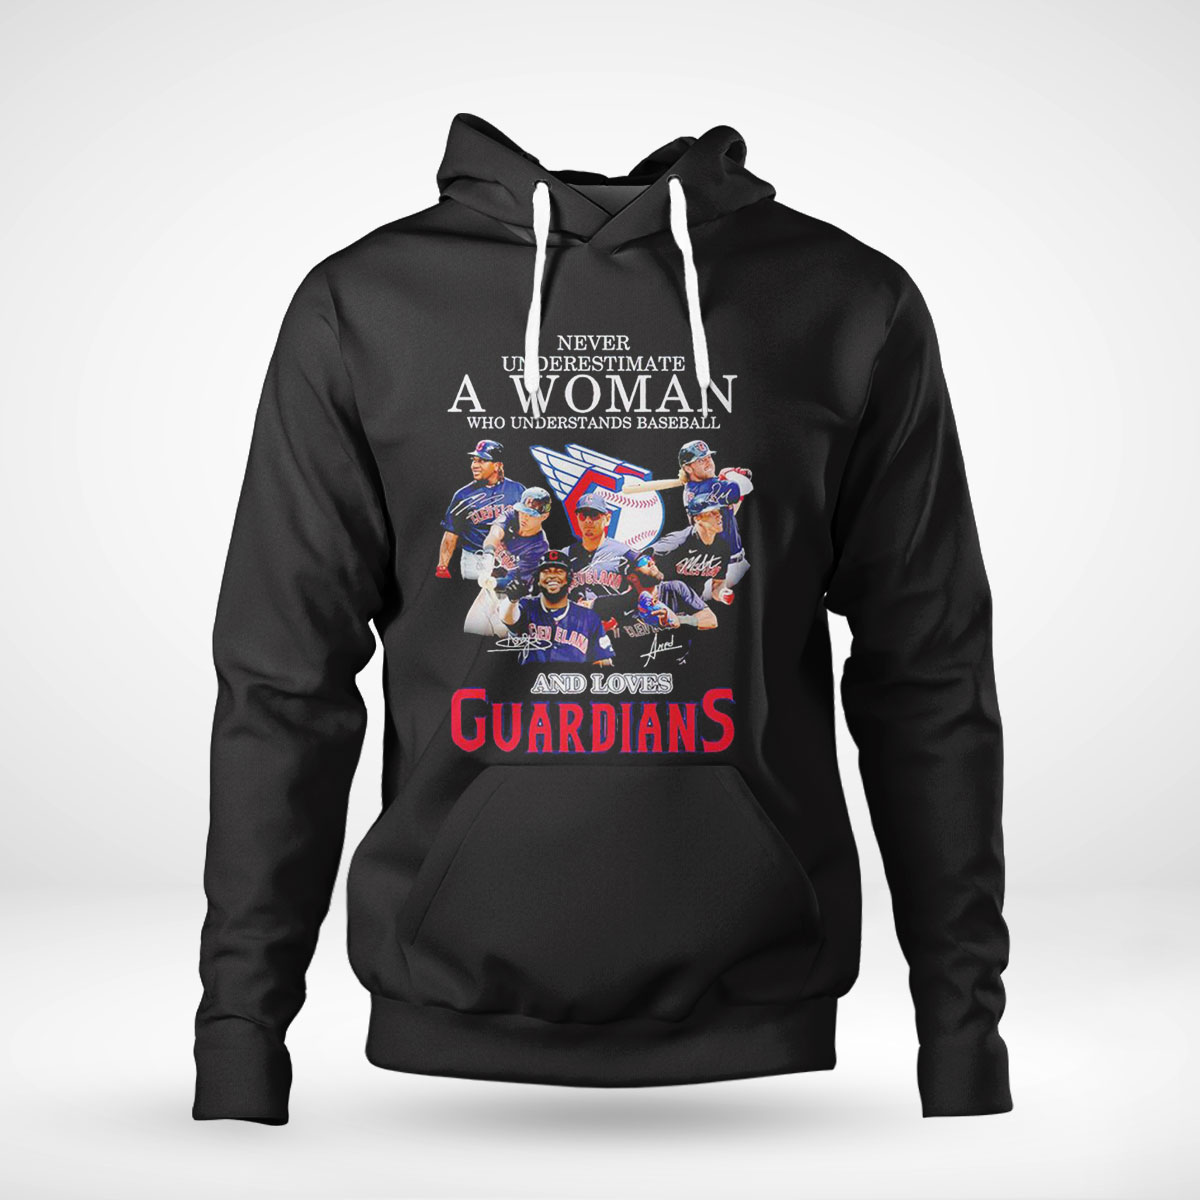 Never Underestimate A Woman Who Understands Football And Loves Guardians Signatures Shirt Long Sleeve, Ladies Tee